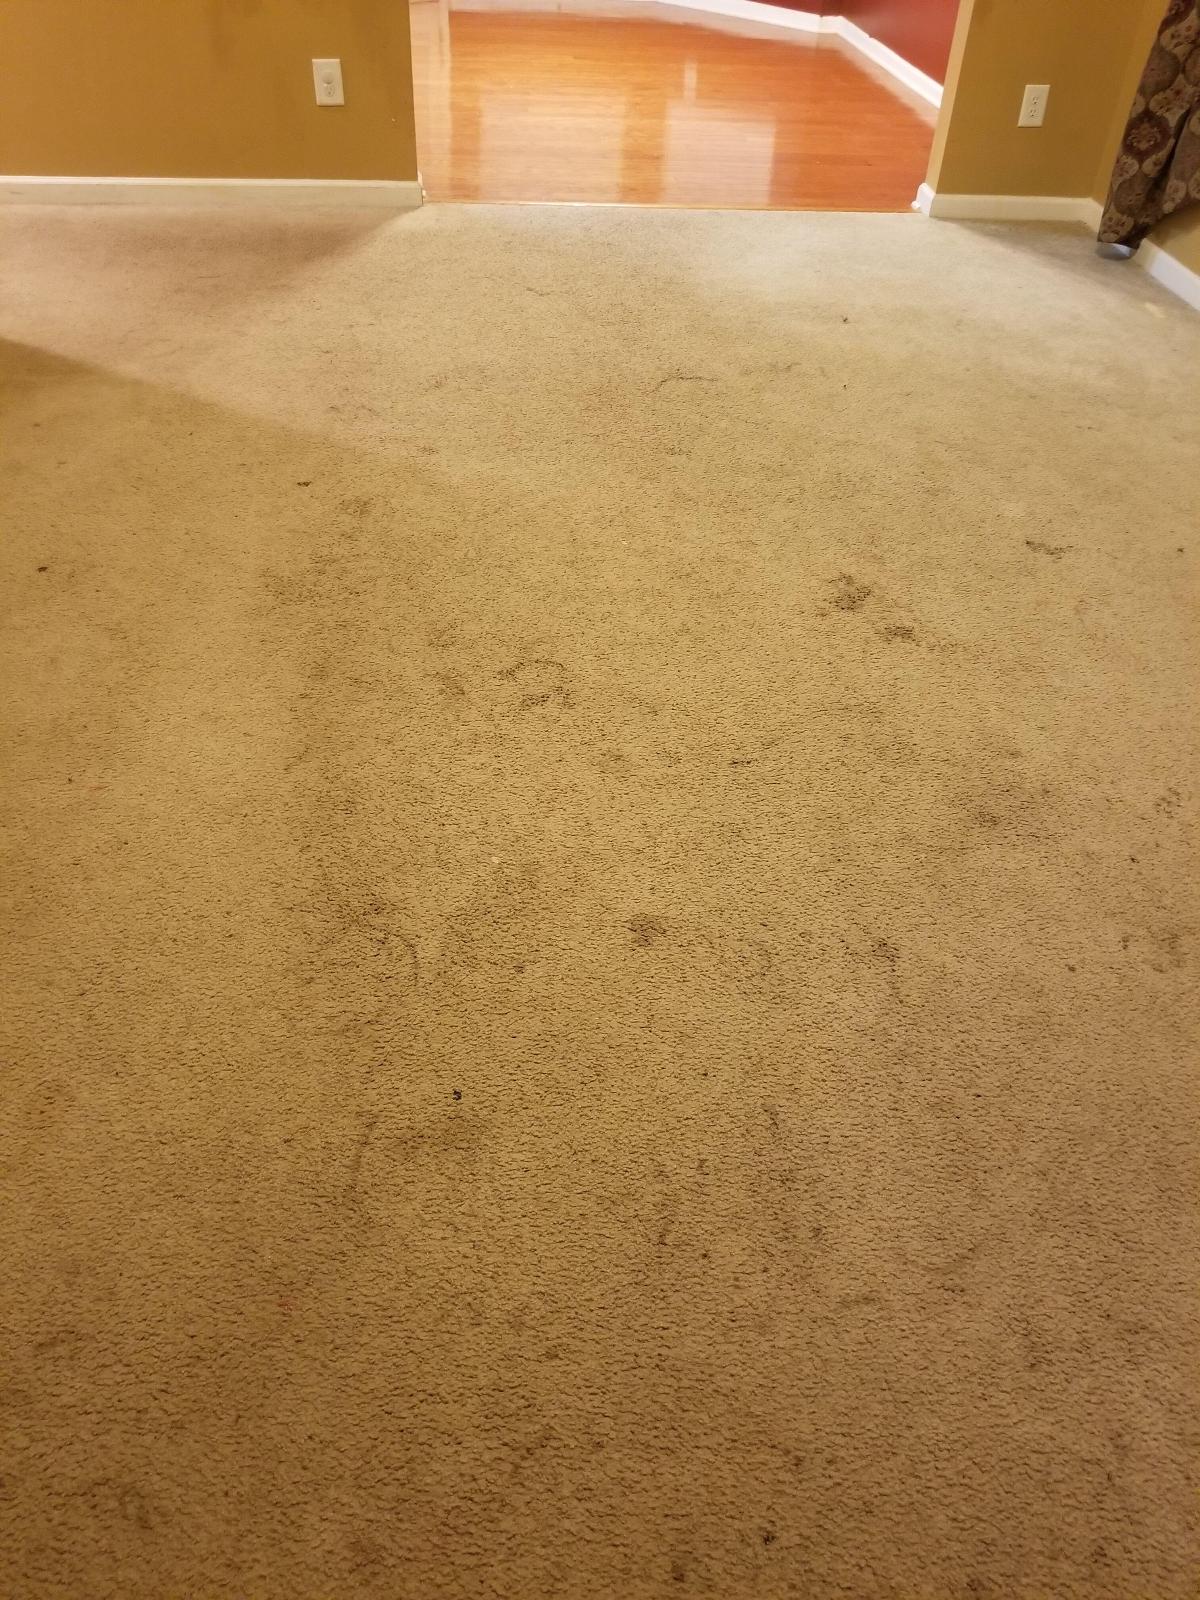 Carpet Cleaning Services in Durham | Chapel Hill | Raleigh